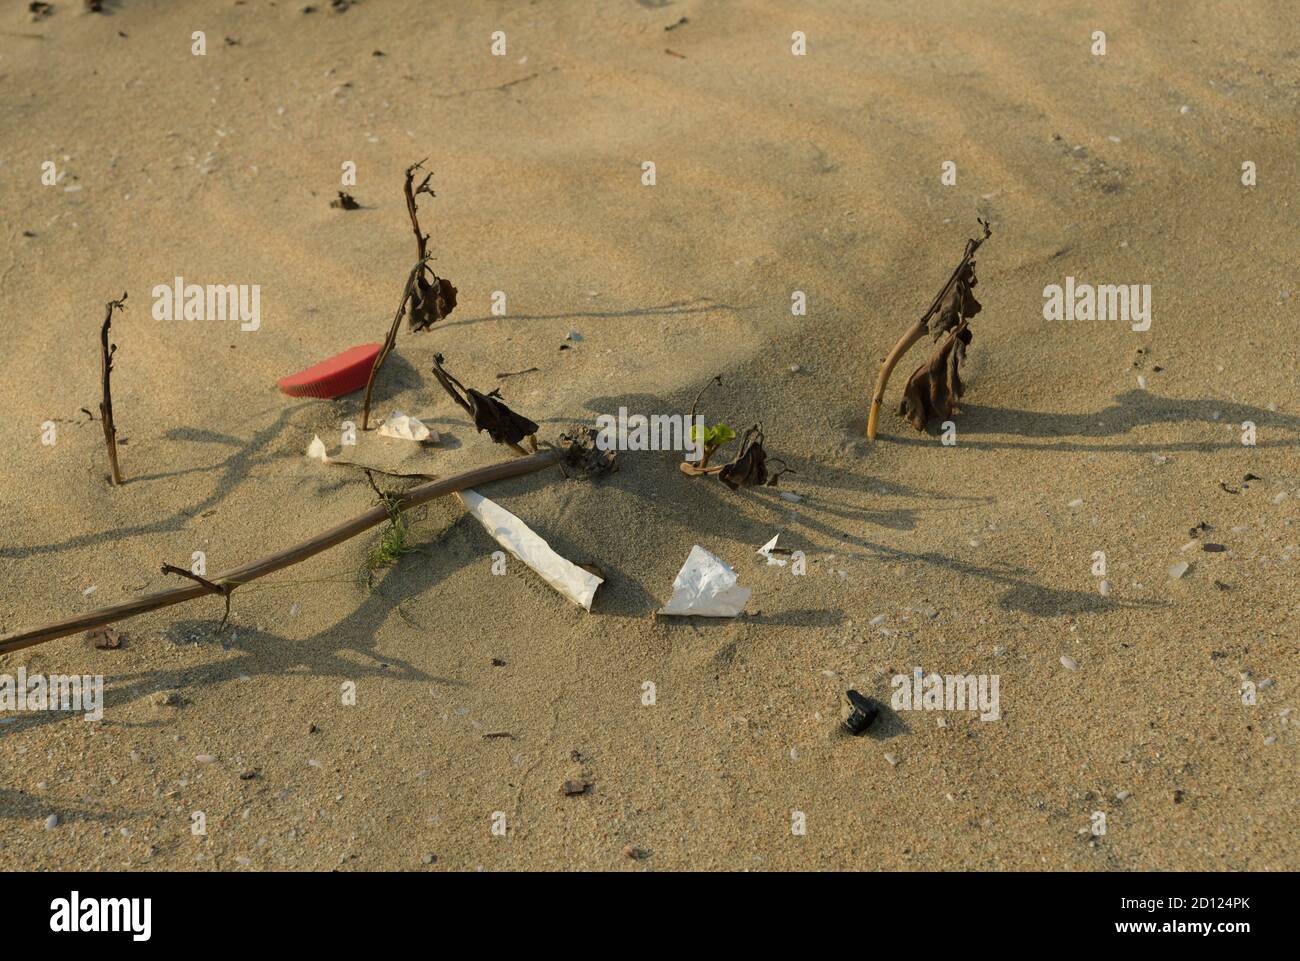 Plastic pollution, cap and food packaging in sand with plant, Durban, South Africa, litter on beach, still life, close up, illustration, recycling Stock Photo